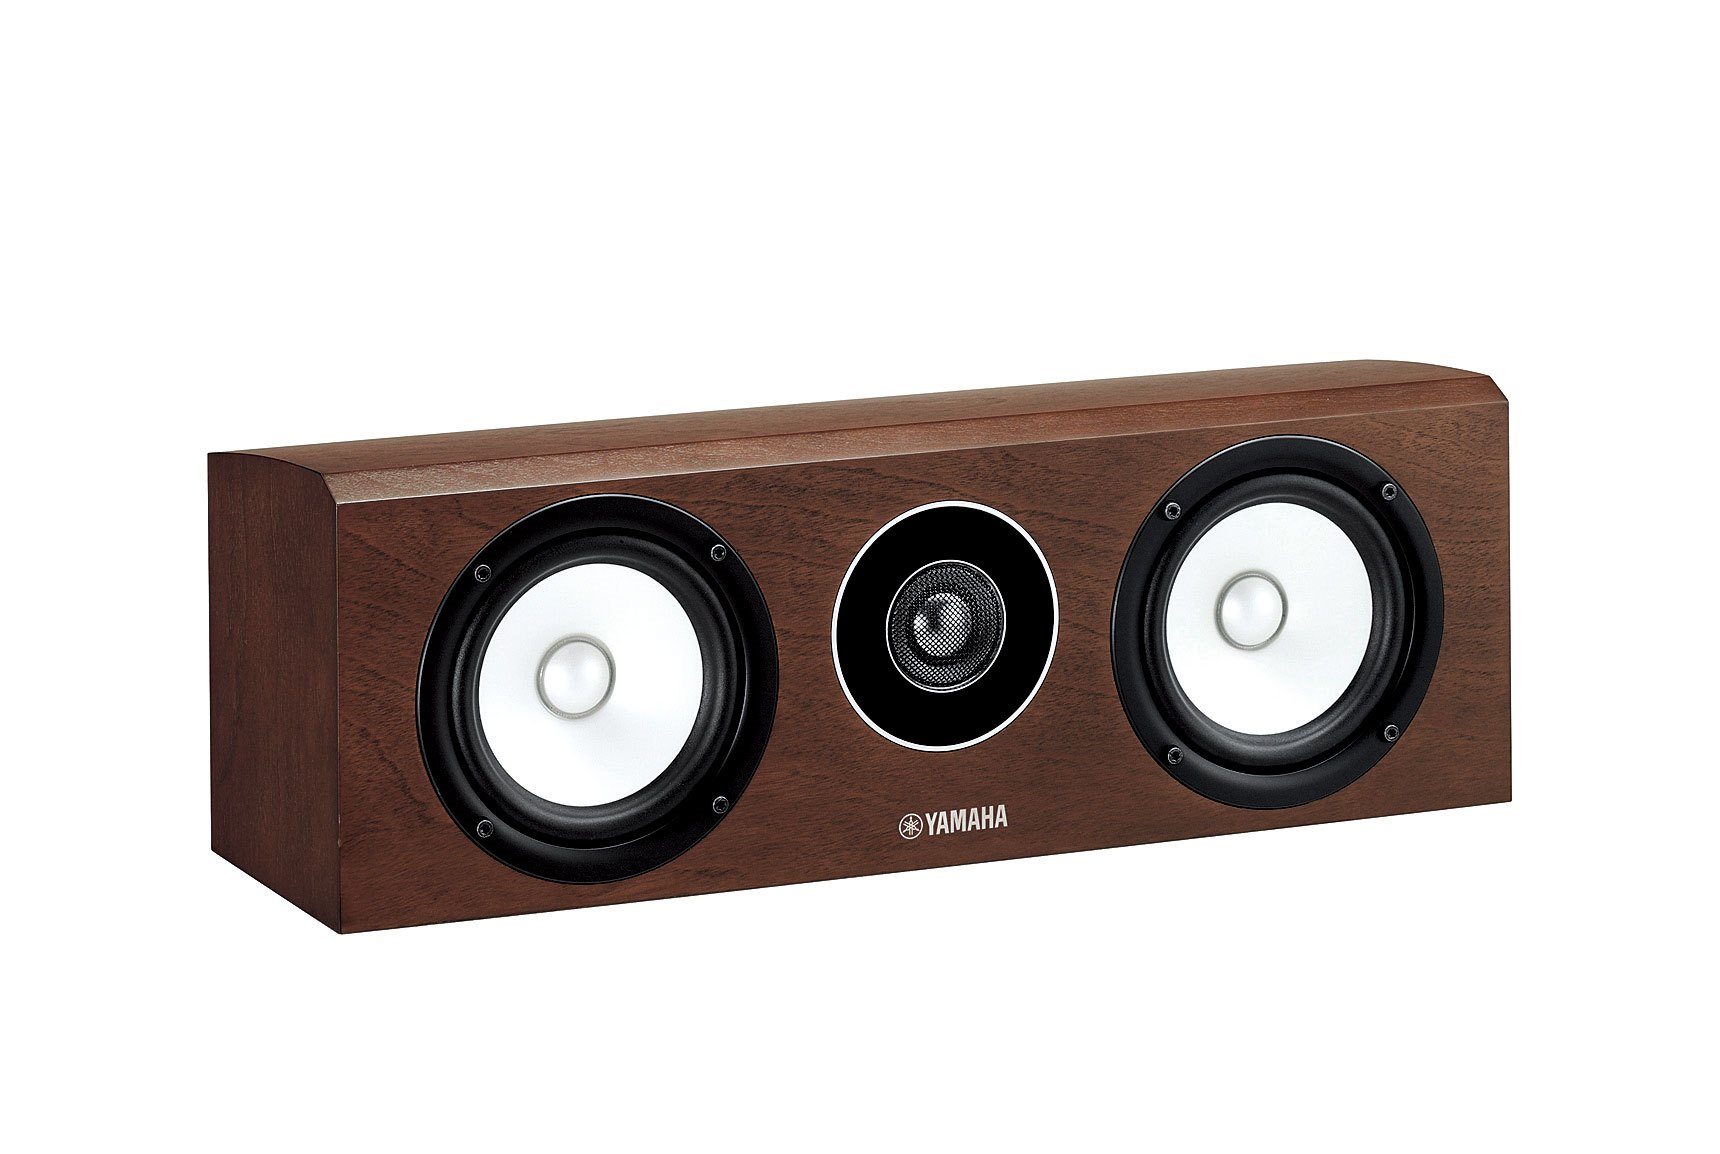 NS-C700 - Overview - Speaker Systems - Audio & Visual - Products